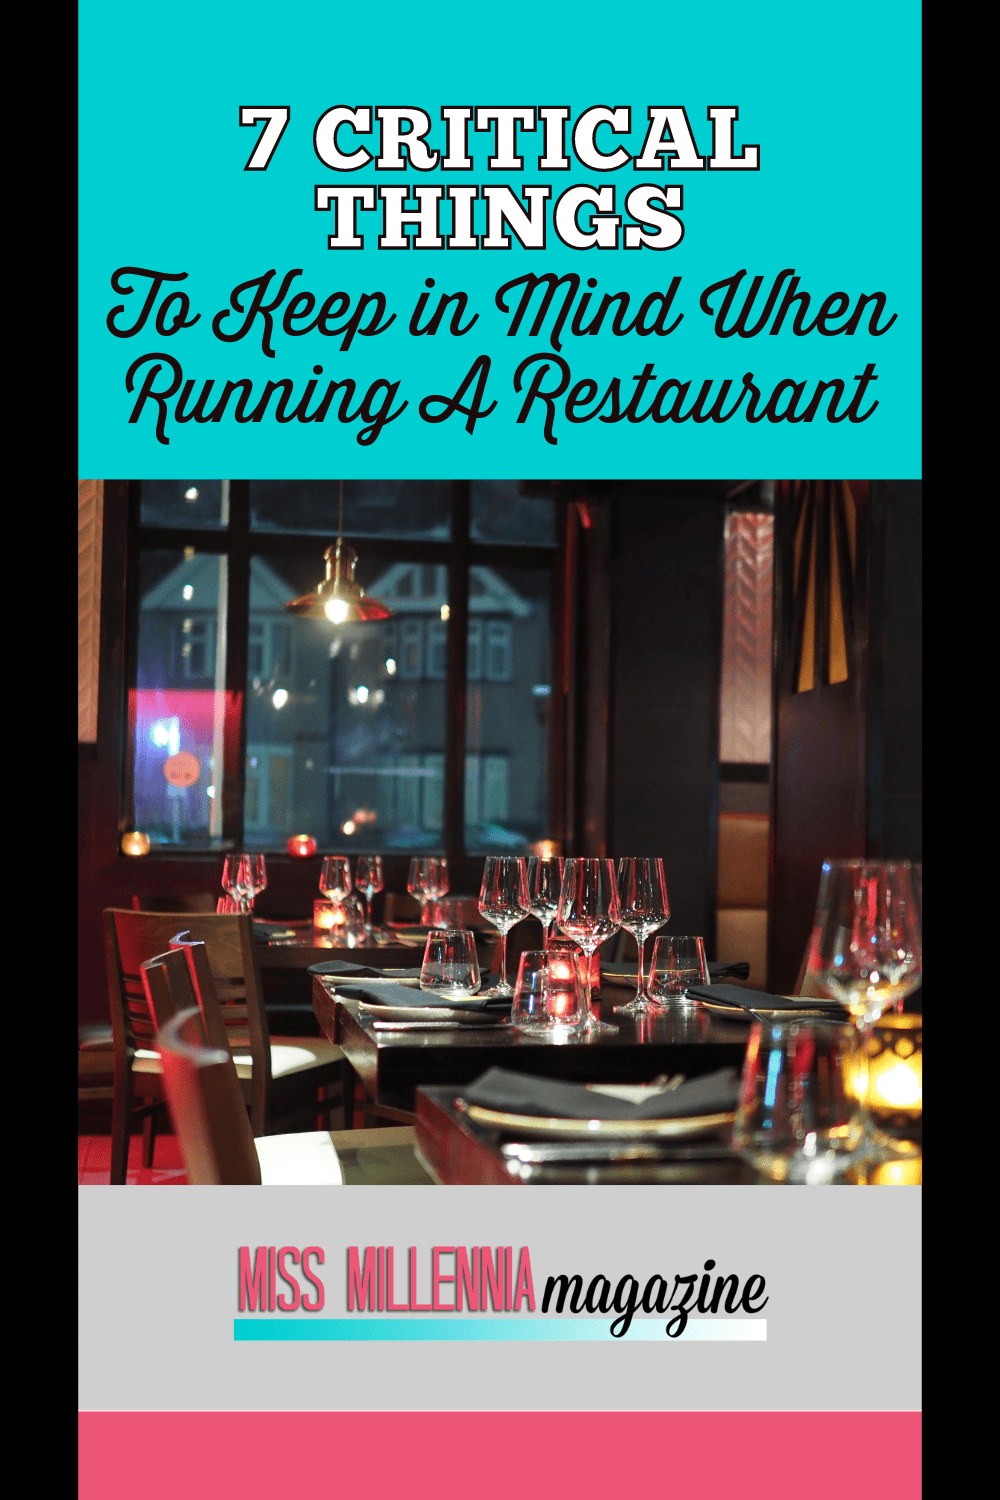 7 Critical Things To Keep in Mind When Running A Restaurant